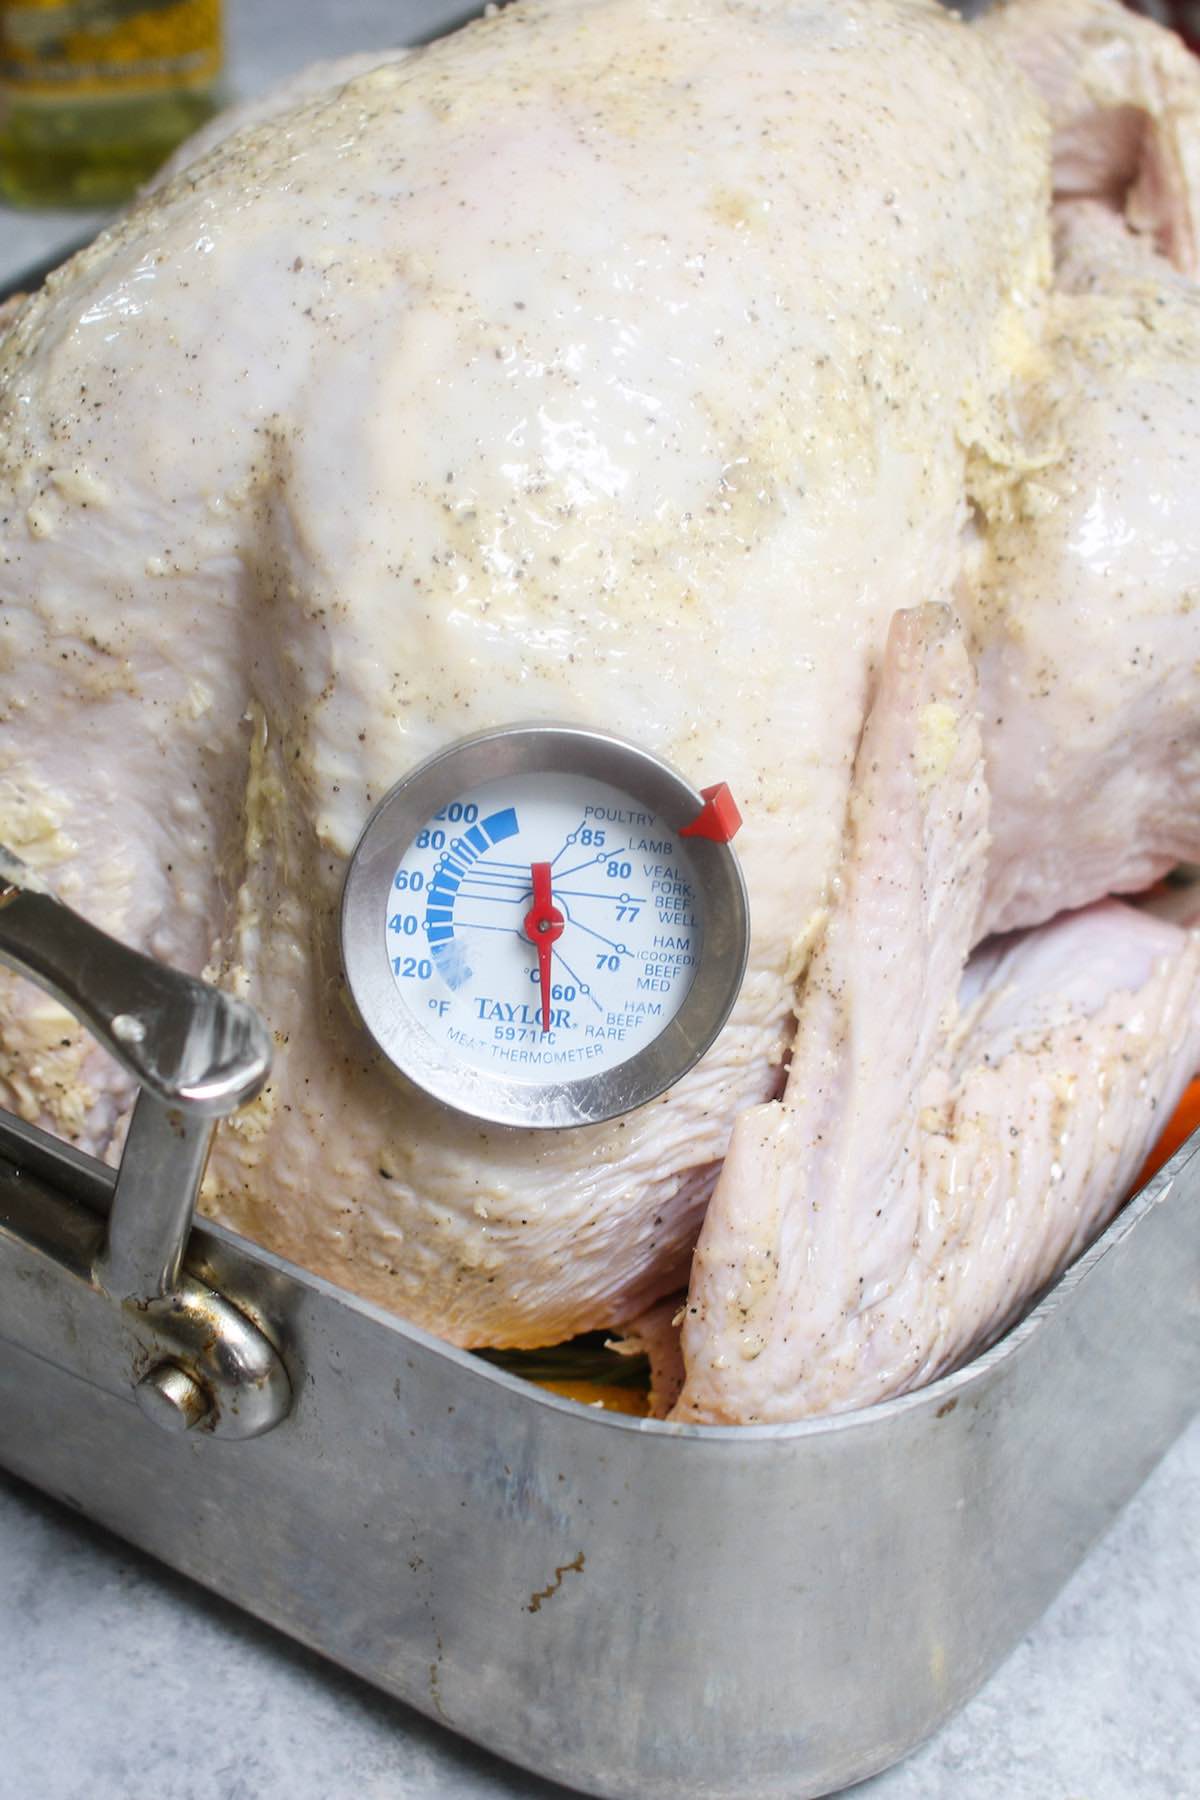 Insert an oven-proof food thermometer into the turkey before roasting.